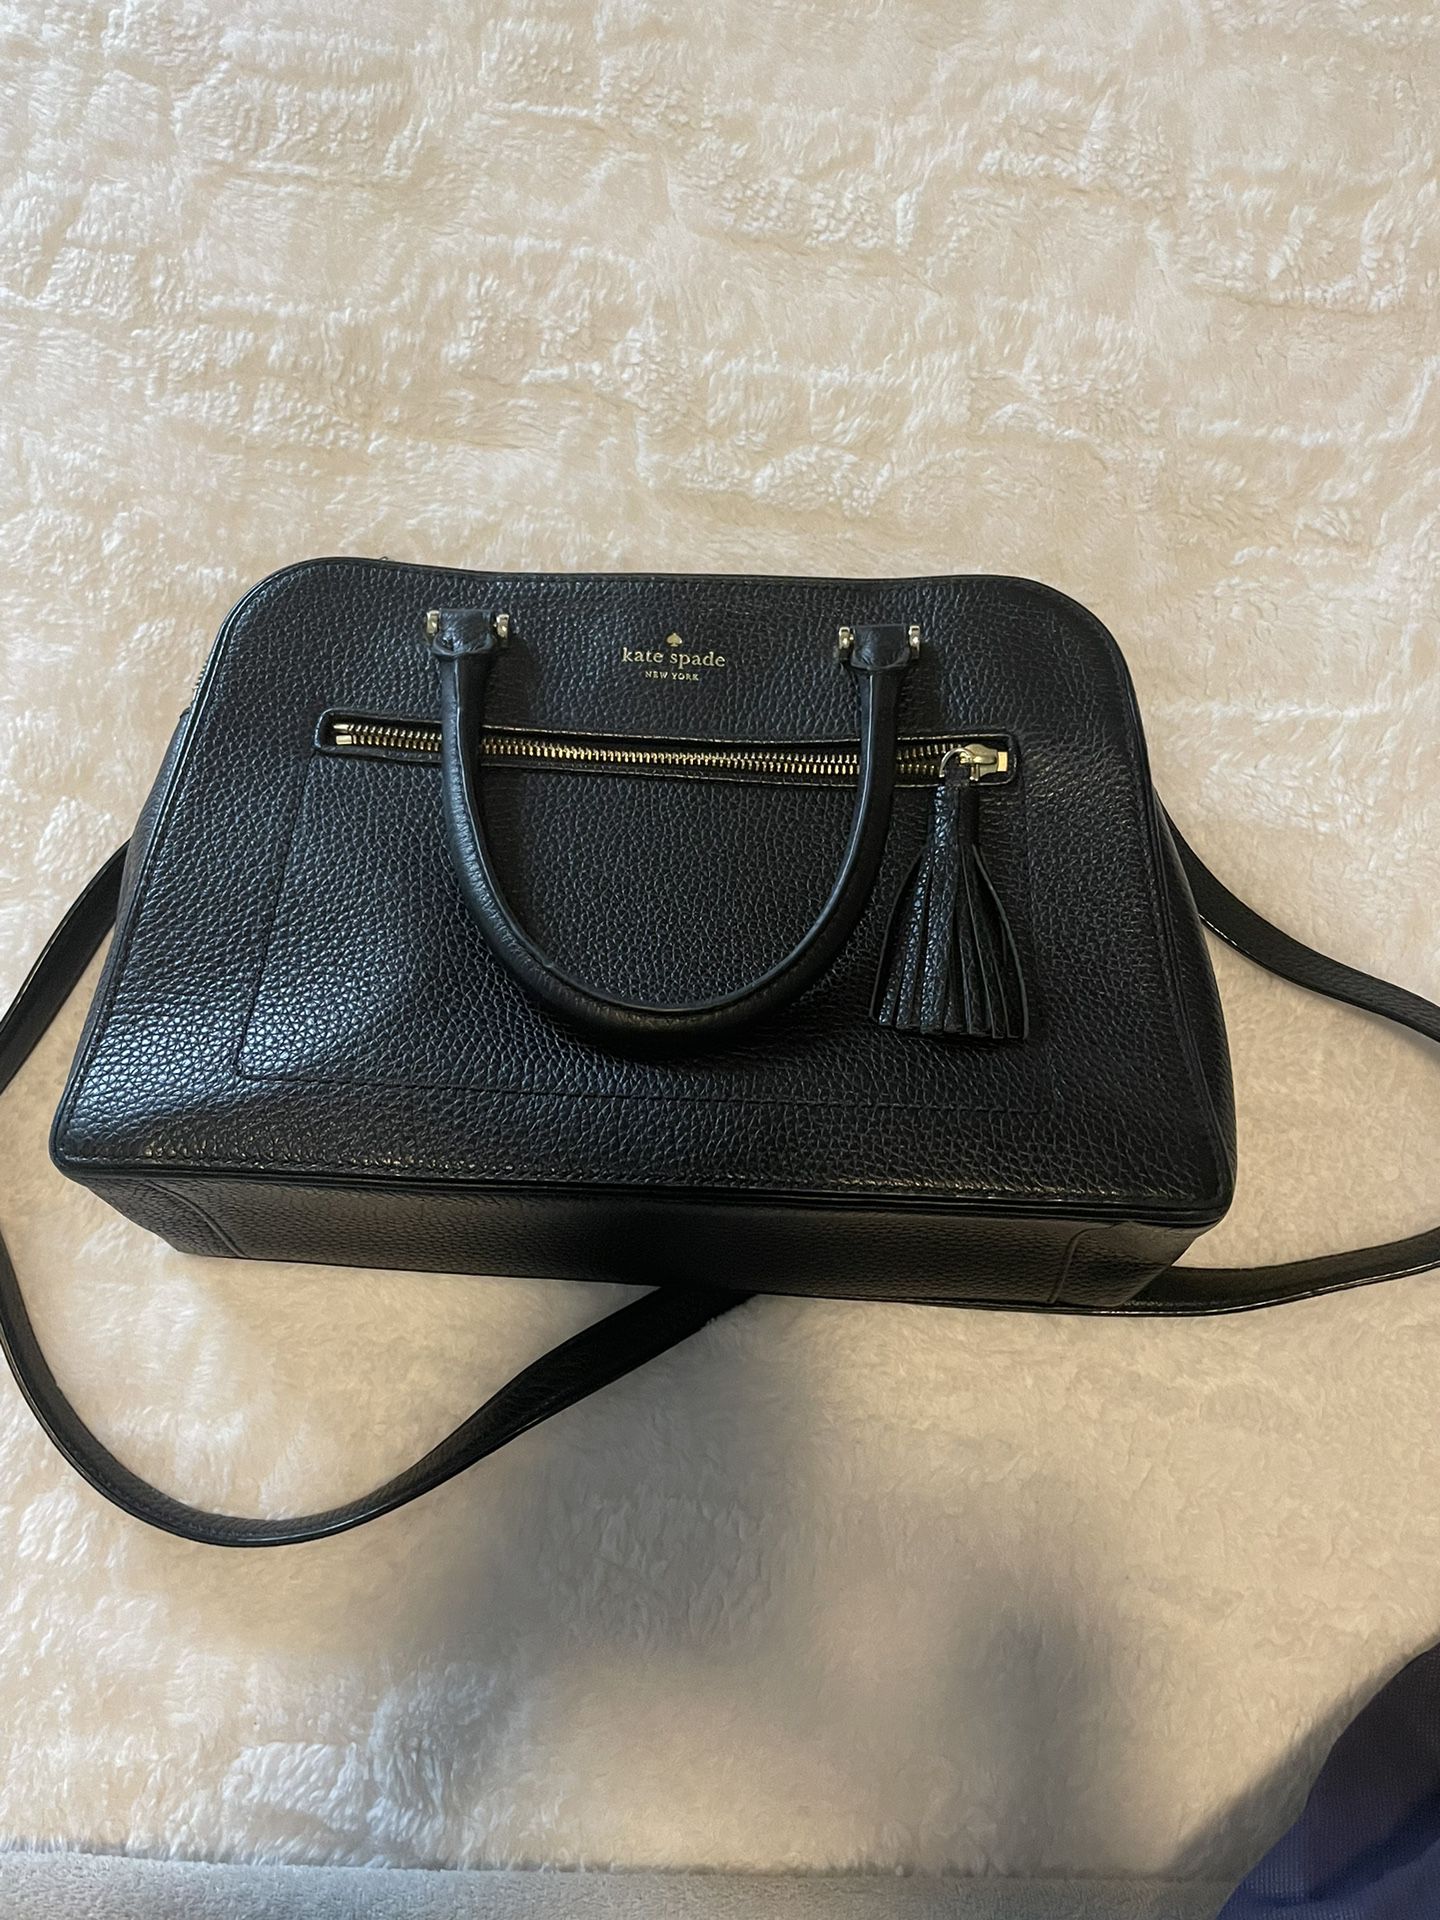 Kate Spade Black Purse And Wallet for Sale in Orange, CA - OfferUp